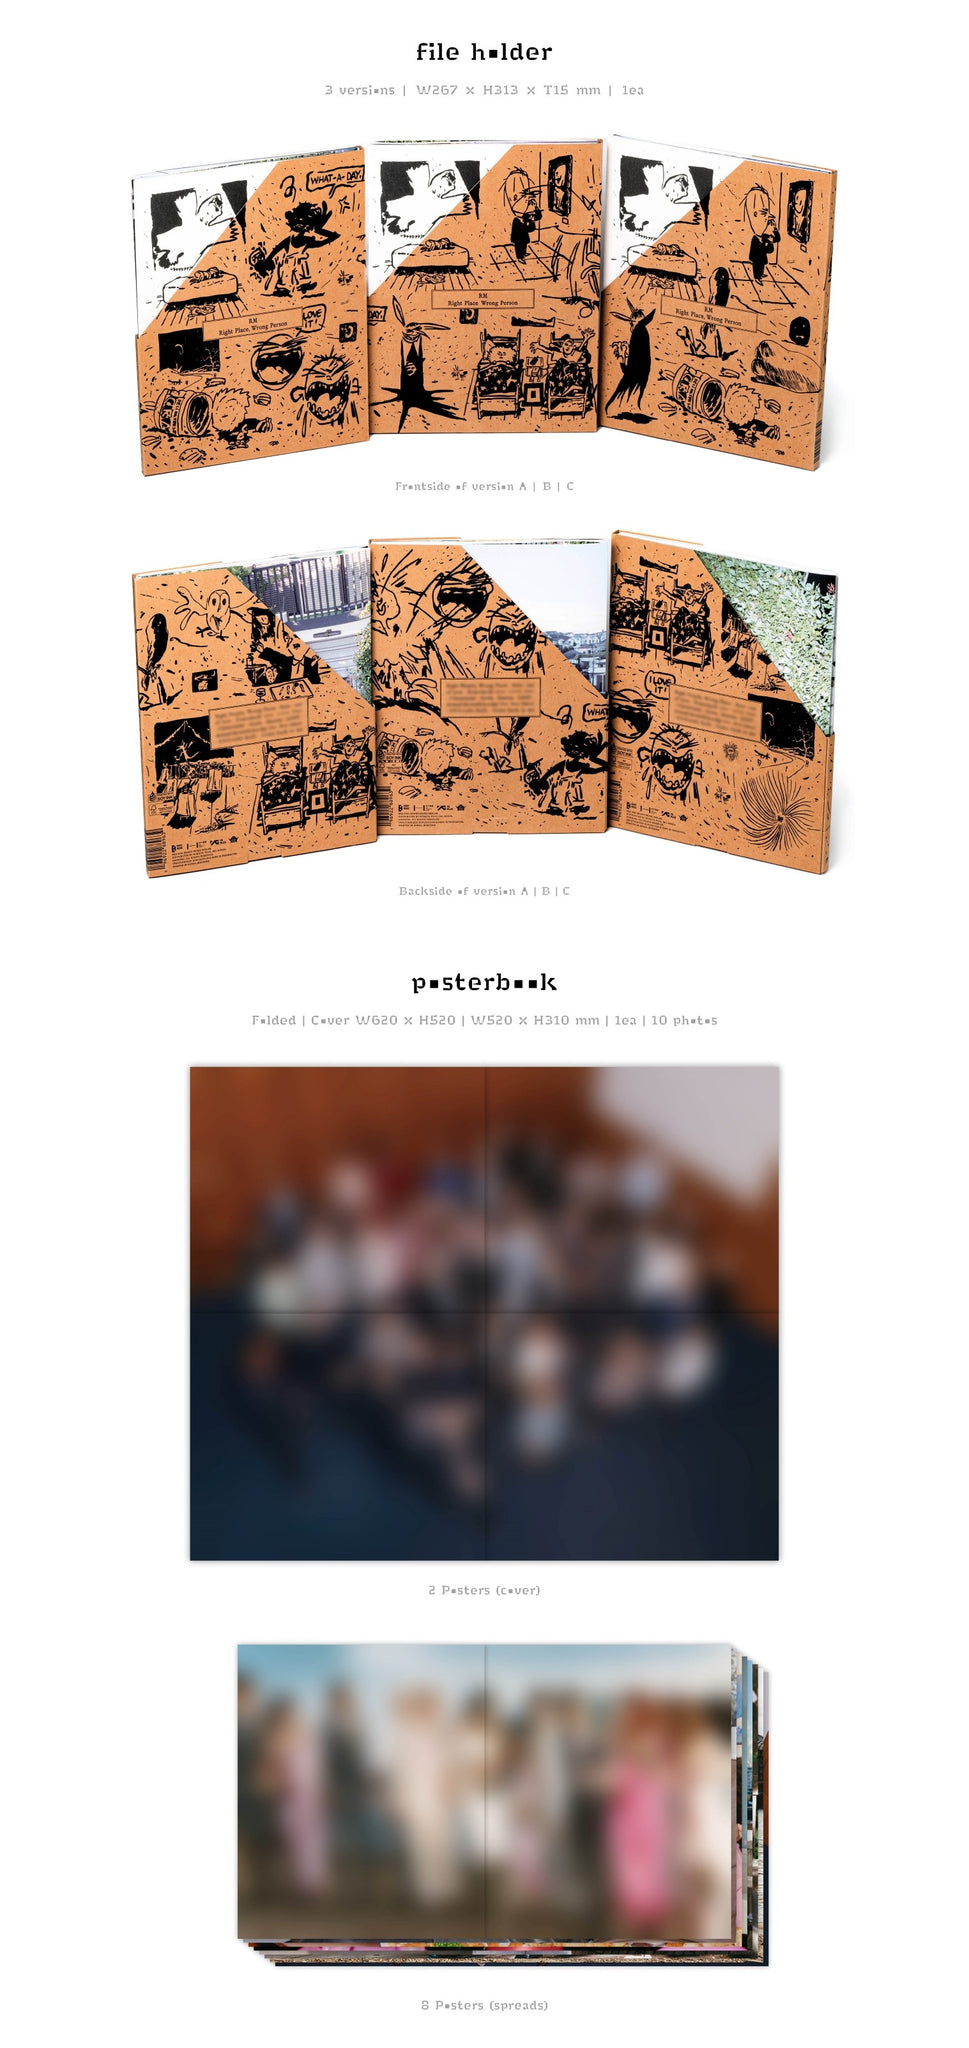 RM (BTS) 2nd Solo Album Right Place, Wrong Person Inclusions: File Holder, Posterbook (Folded)